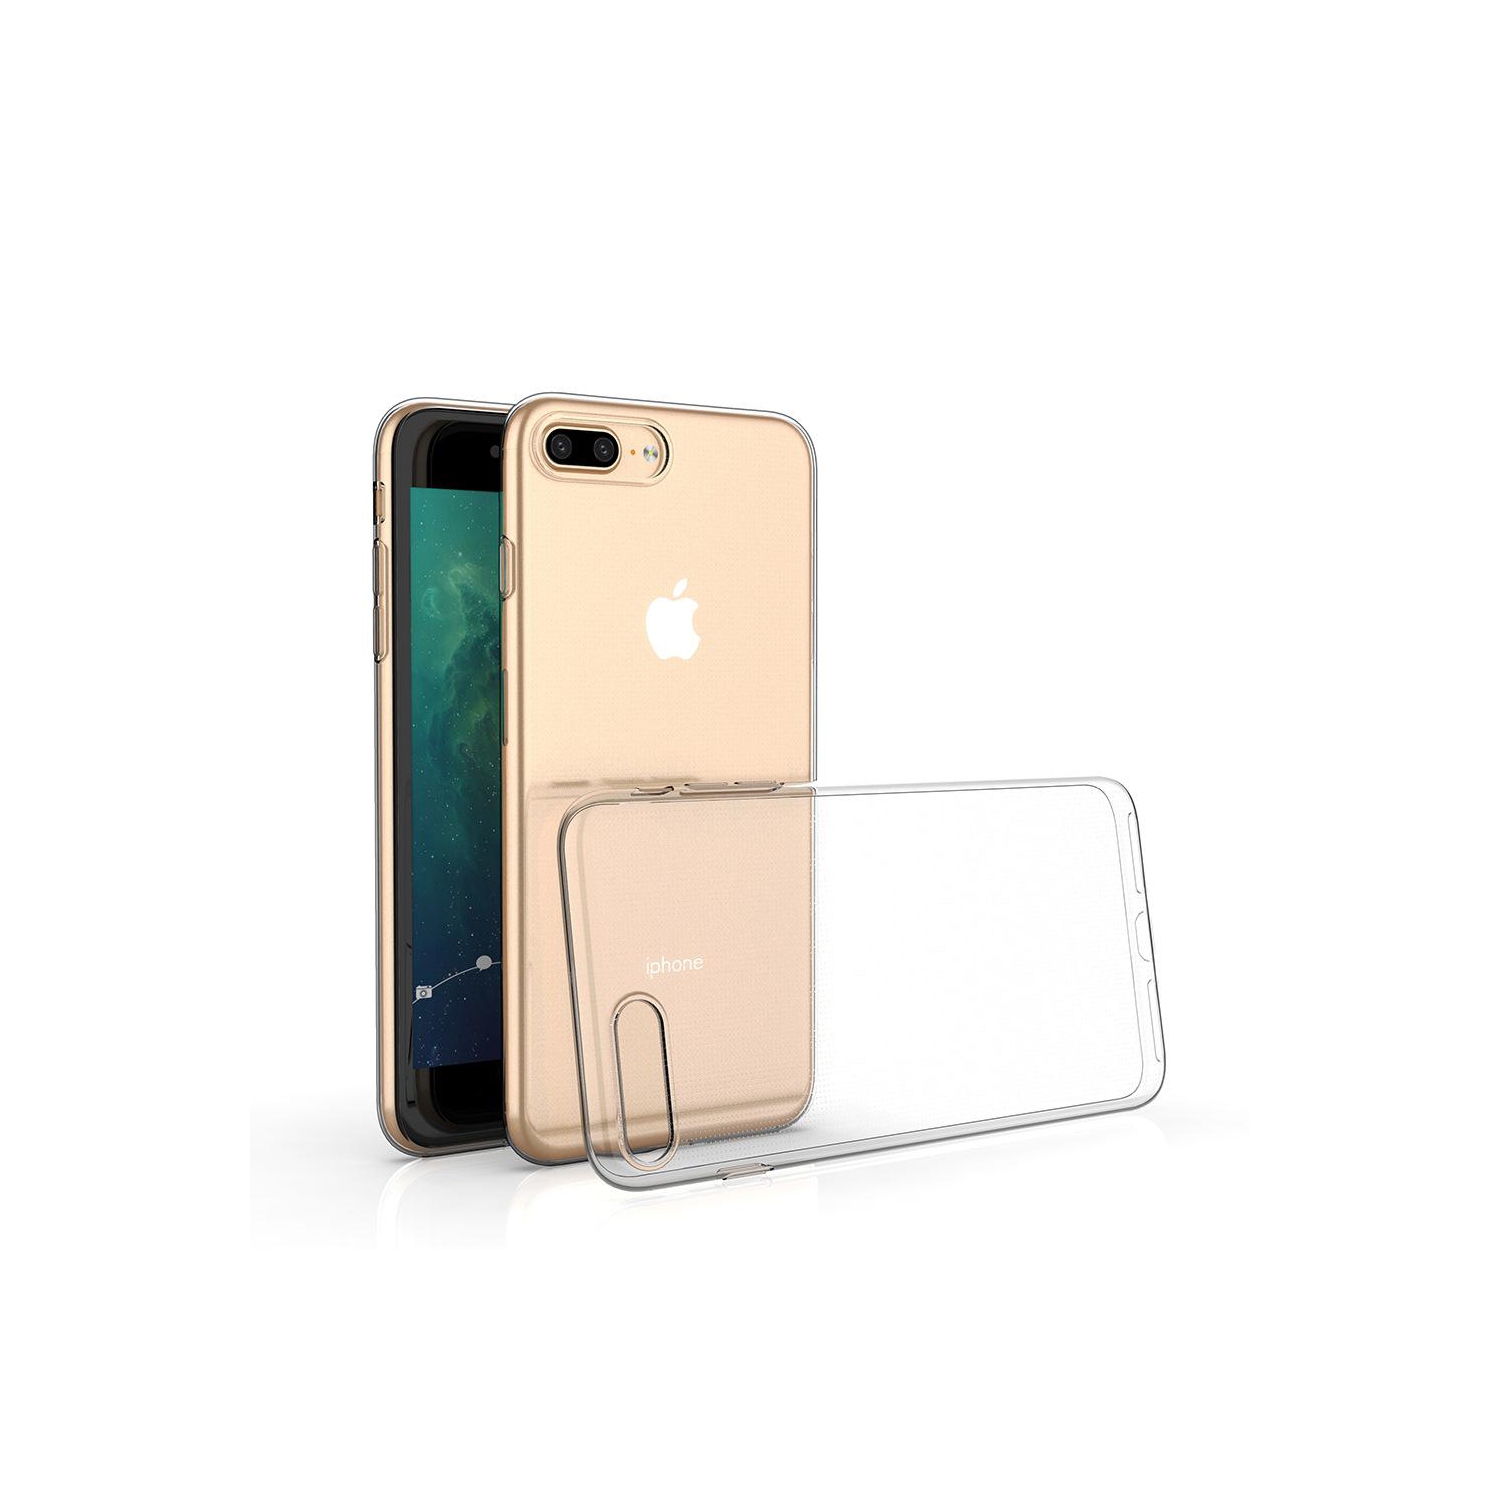 PANDACO Clear Case for iPhone 7 Plus or iPhone 8 Plus